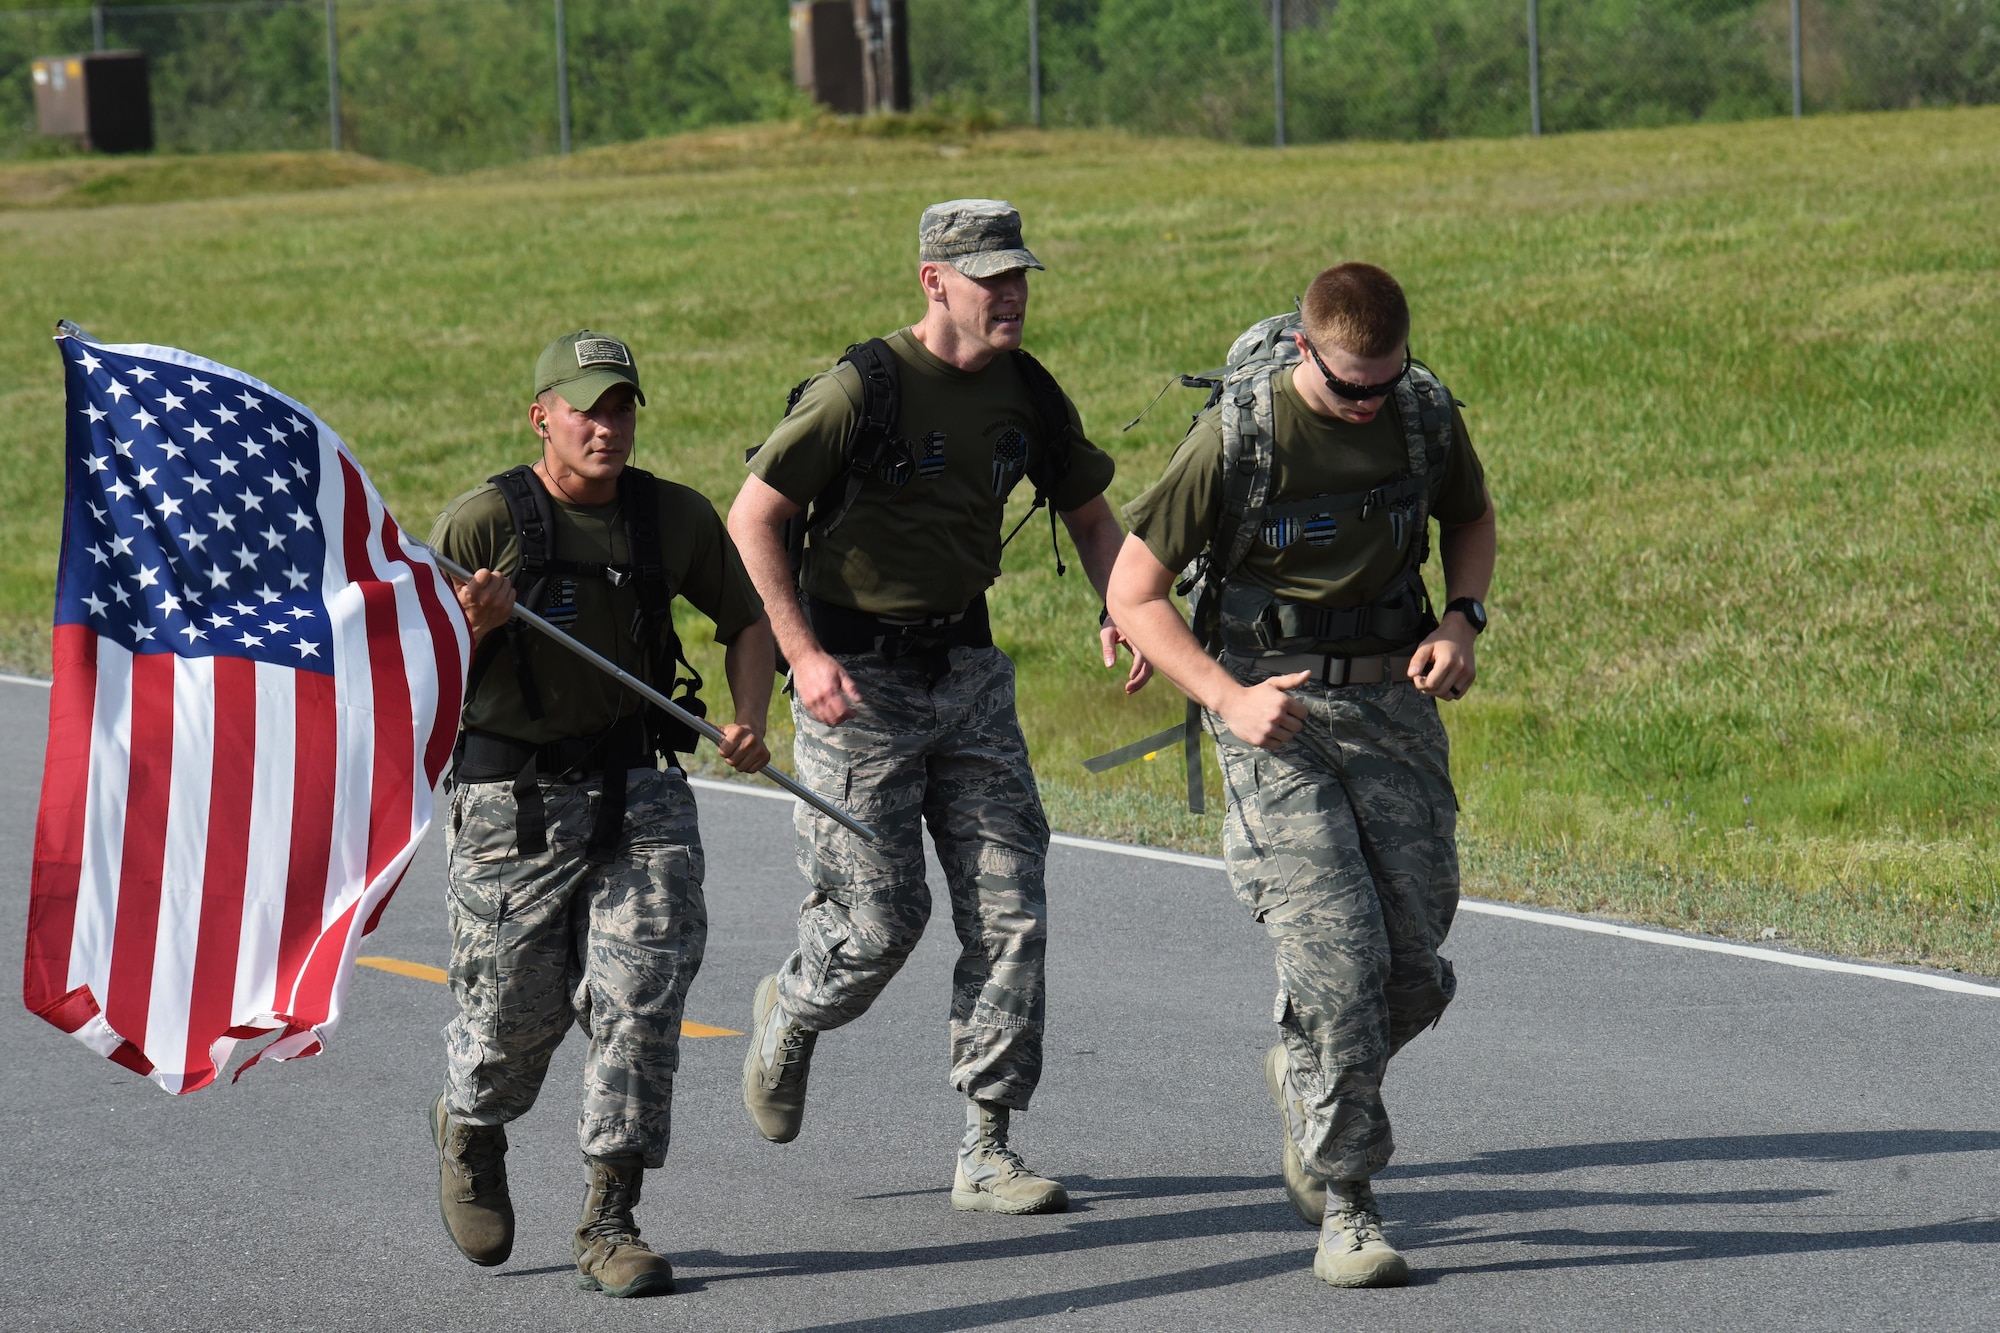 Airman Xavier De Leon (left), and Airman Calahan Ross (right), 4th Security Forces Squadron entry controllers finish an 8.3-mile ruck march during police week, April 17, 2017, at Seymour Johnson Air Force Base, North Carolina. Police week was created in 1962 by then President John F. Kennedy in honor of Peace Officers Memorial Day on May 15. (U.S. Air Force photo by Airman 1st Class Miranda A. Loera)